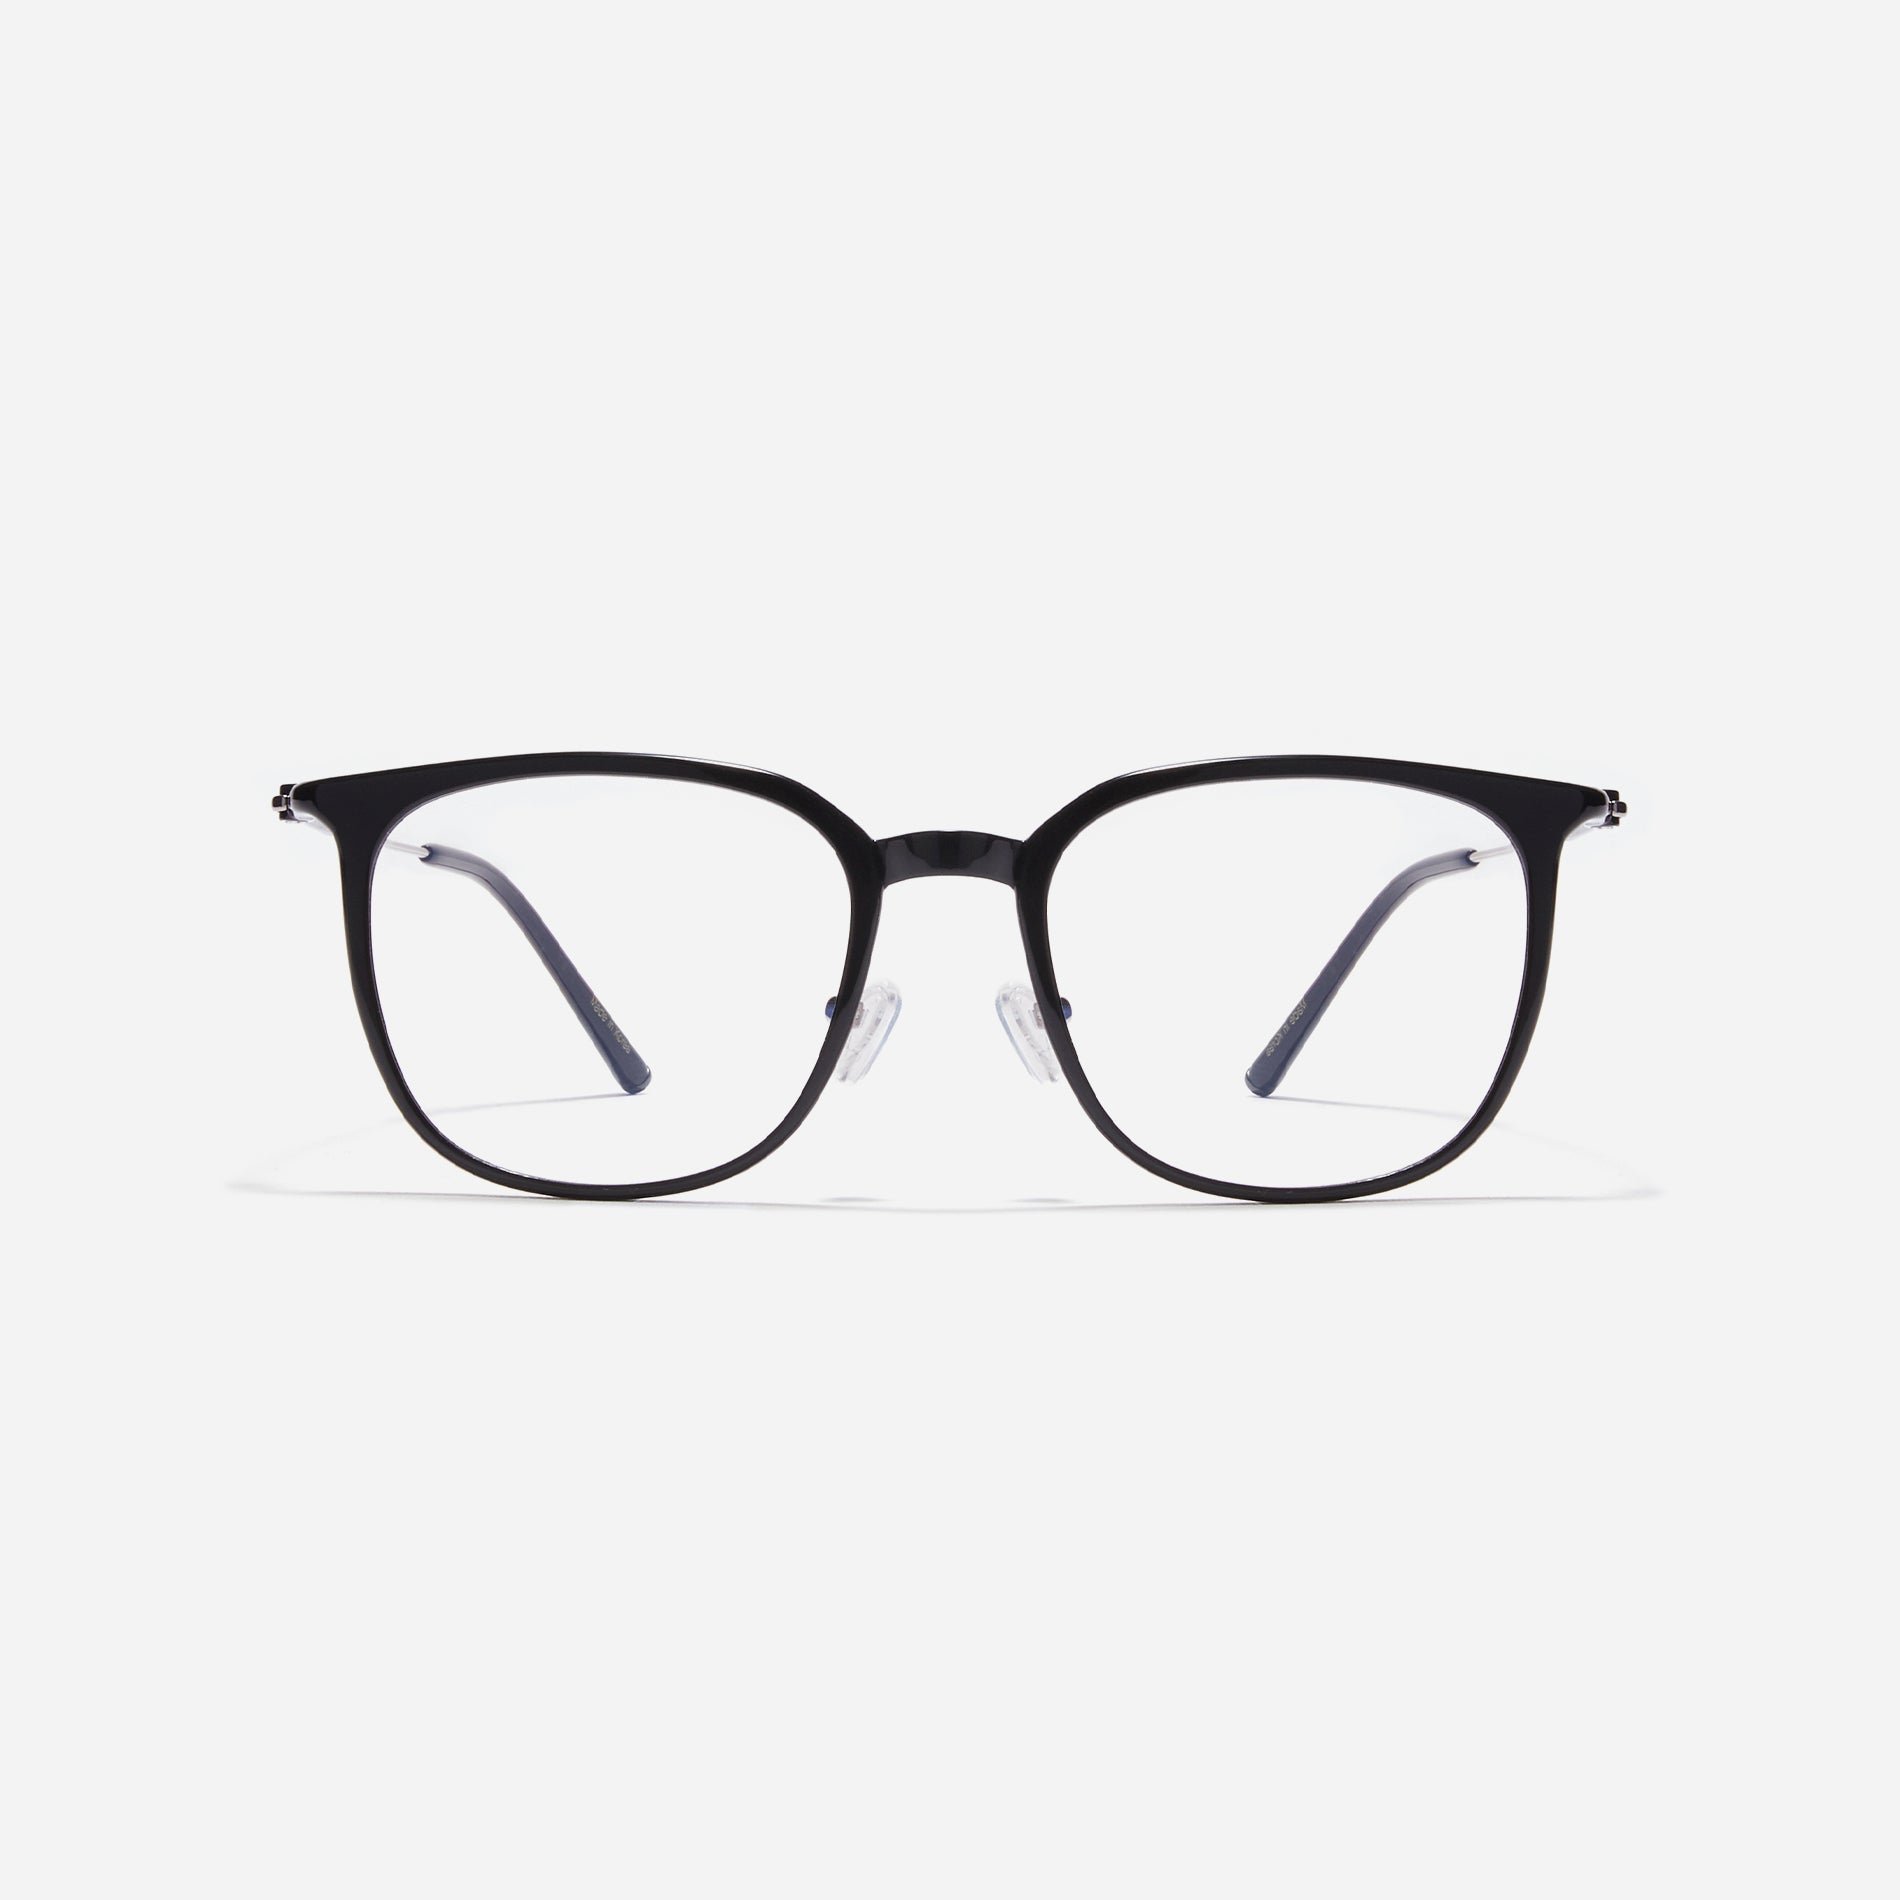 Ultra-lightweight, round square-shaped acetate eyeglasses that offer robust durability that resists breakage. Incorporated with CARIN's patented anti-loosening hinge technology, they ensure a consistently comfortable fit.